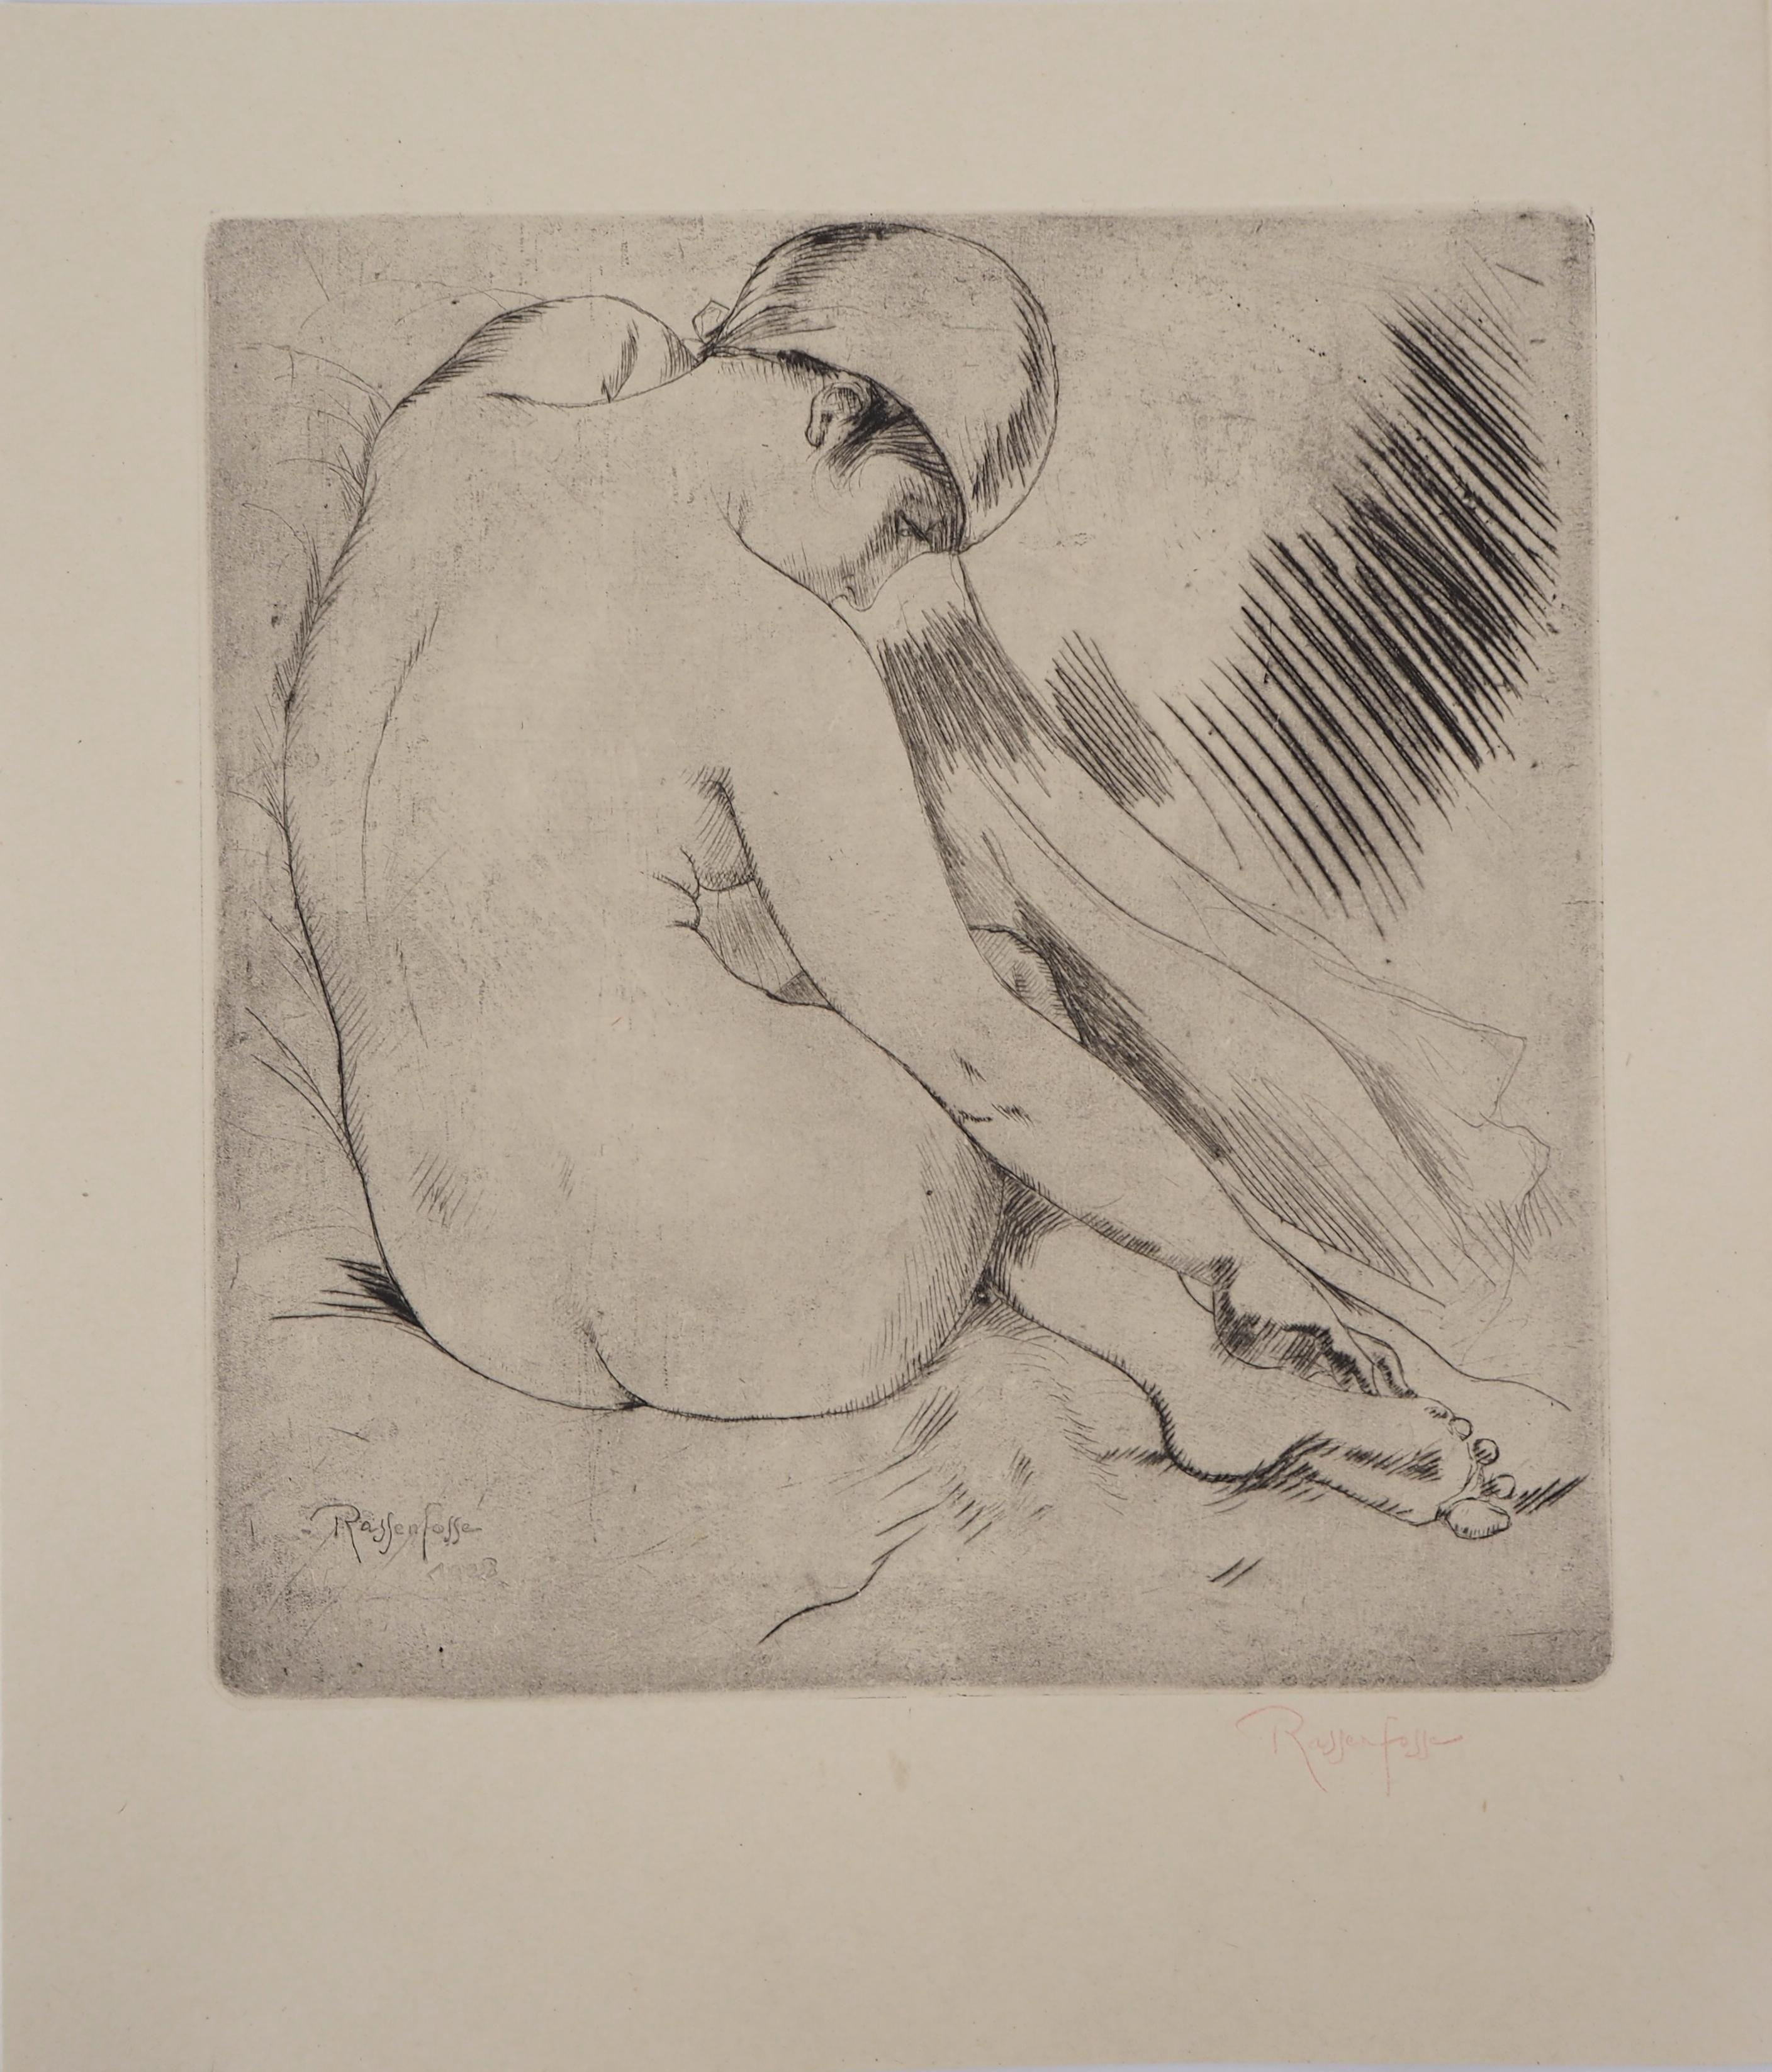 Armand Rassenfosse Figurative Print - Nude with a Scarf - Original drypoint etching, Handsigned, 1928